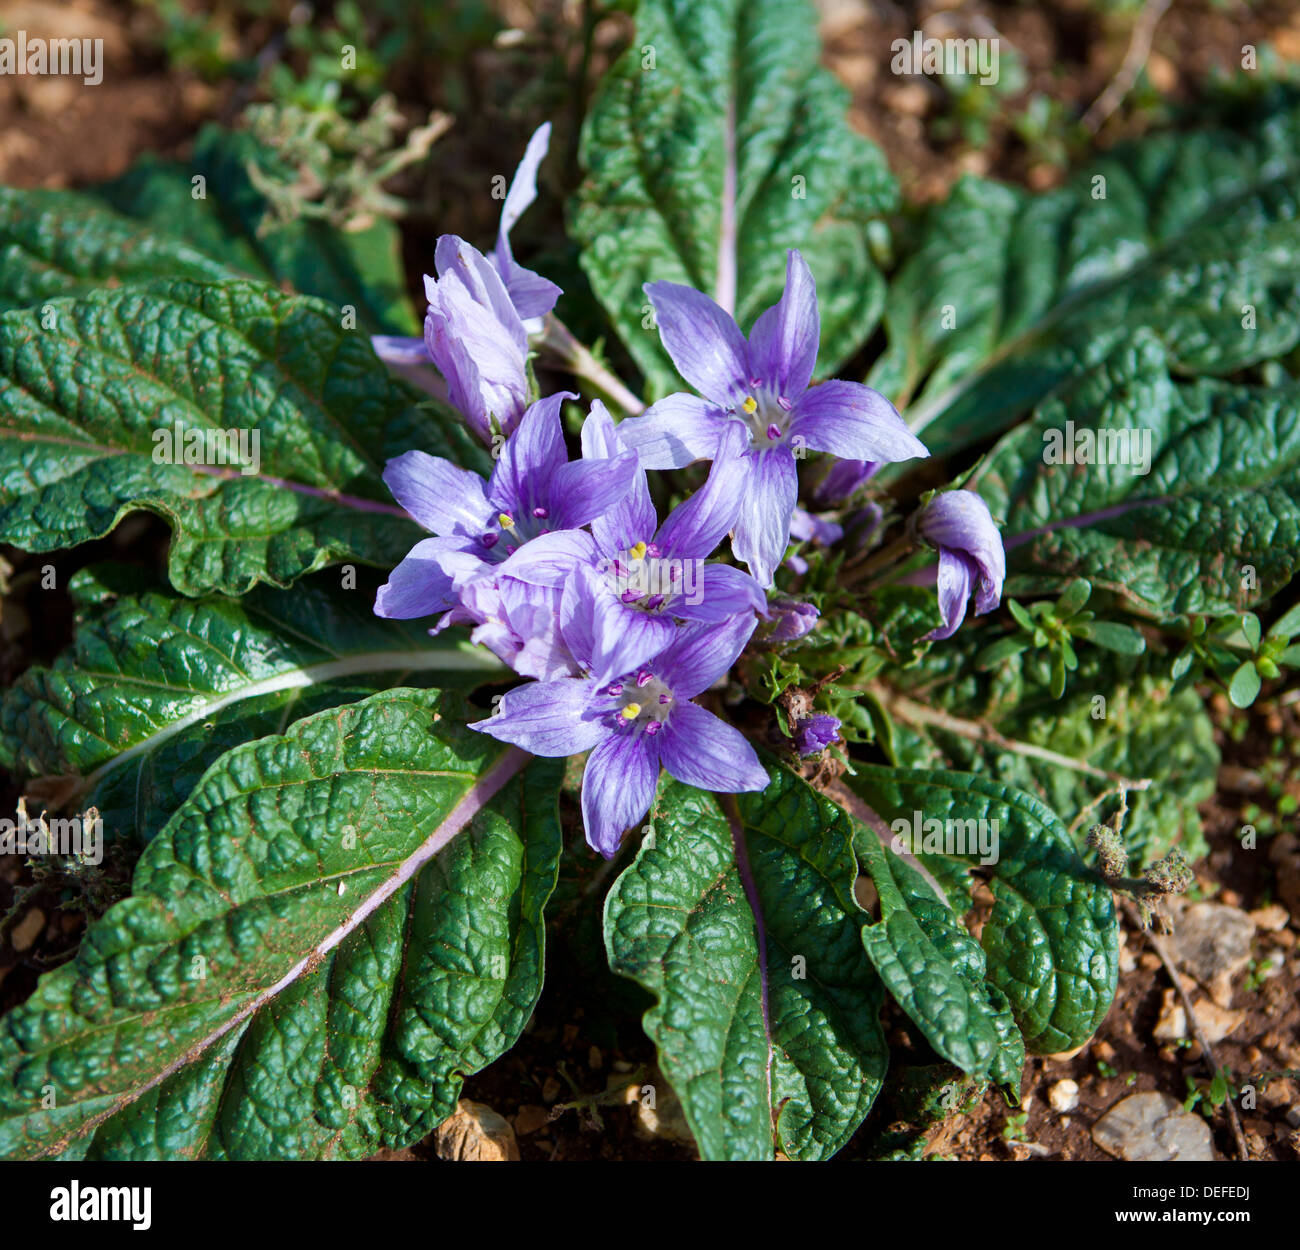 Autumn Mandrake flower in the Zingaro natural reserve in the Province of Trapani, Sicily. Stock Photo